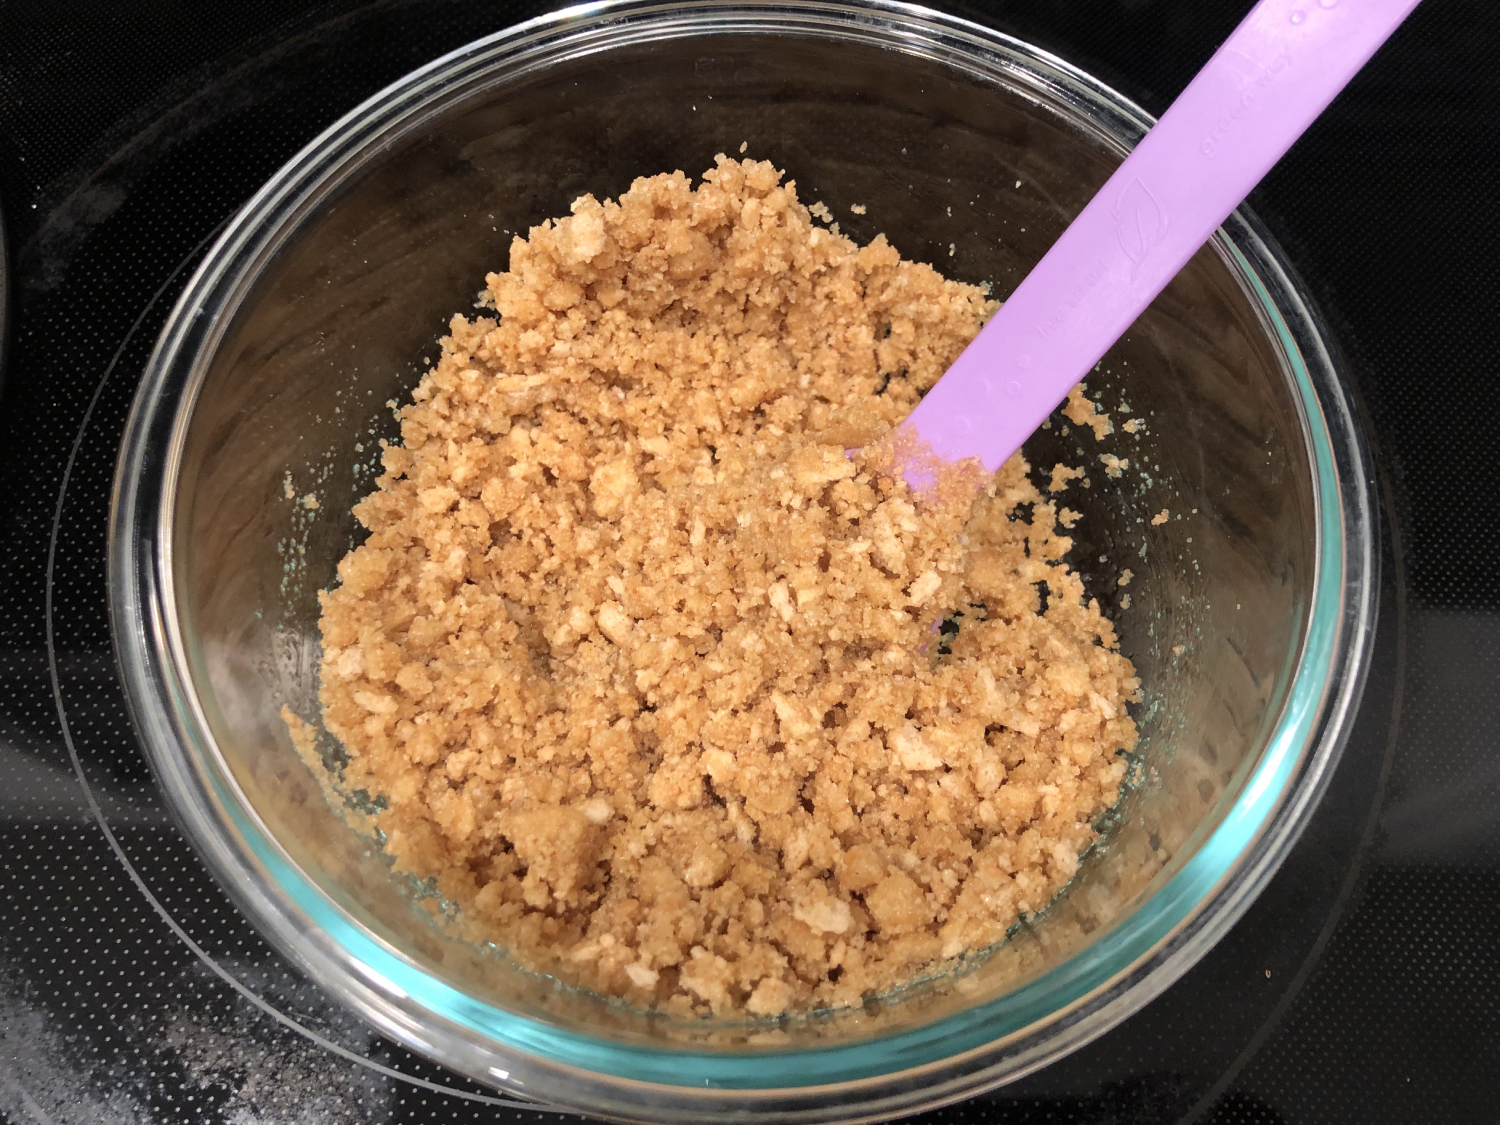 graham cracker and butter mixture in a bowl, with everything evenly combined using a purple spoon